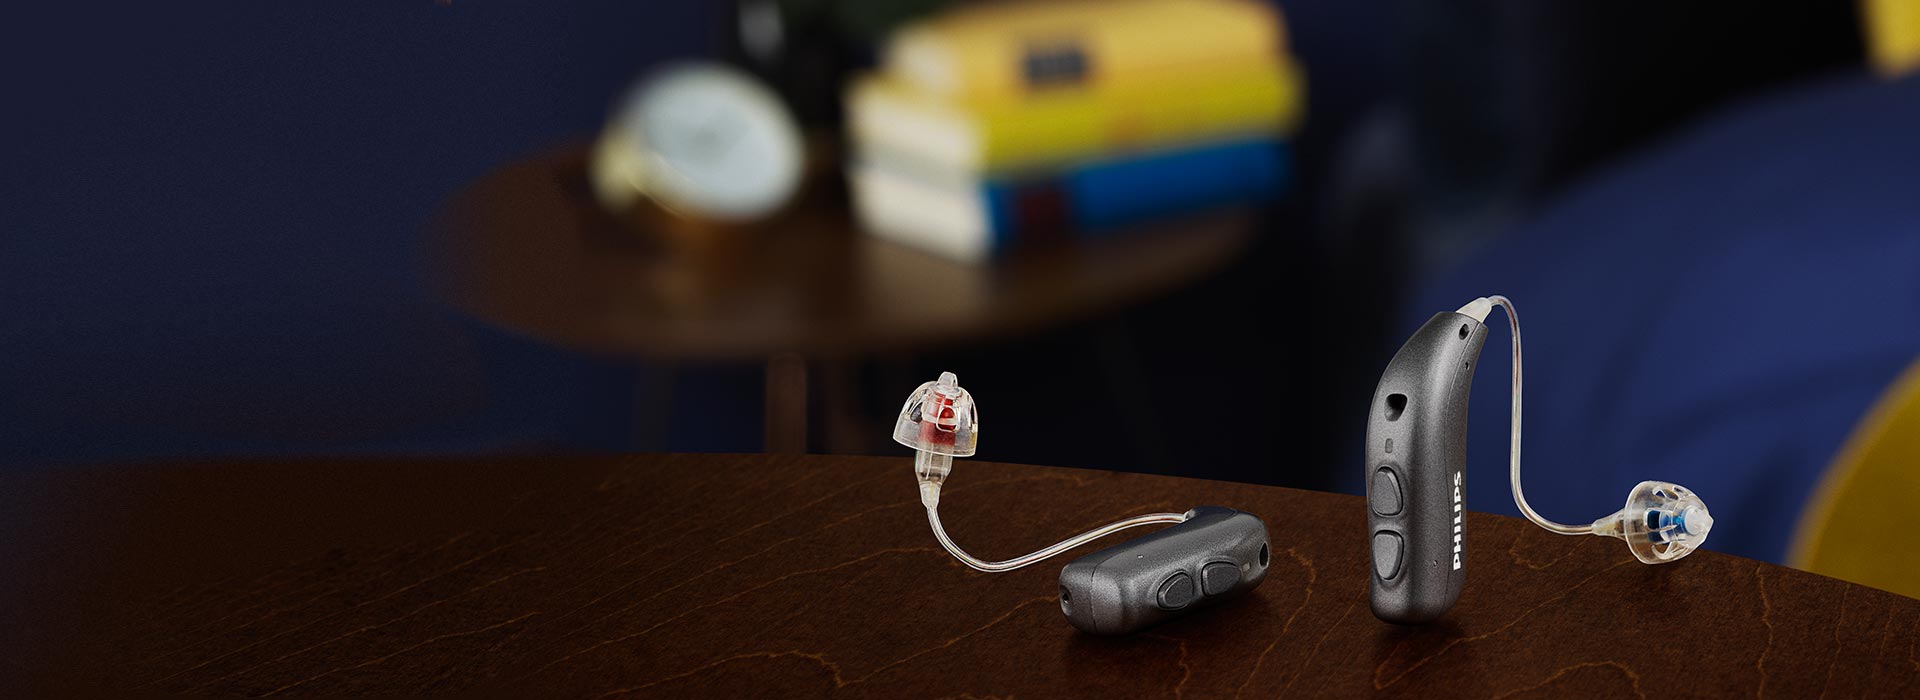 Philips HearLink hearing aids placed on a table in a bedroom